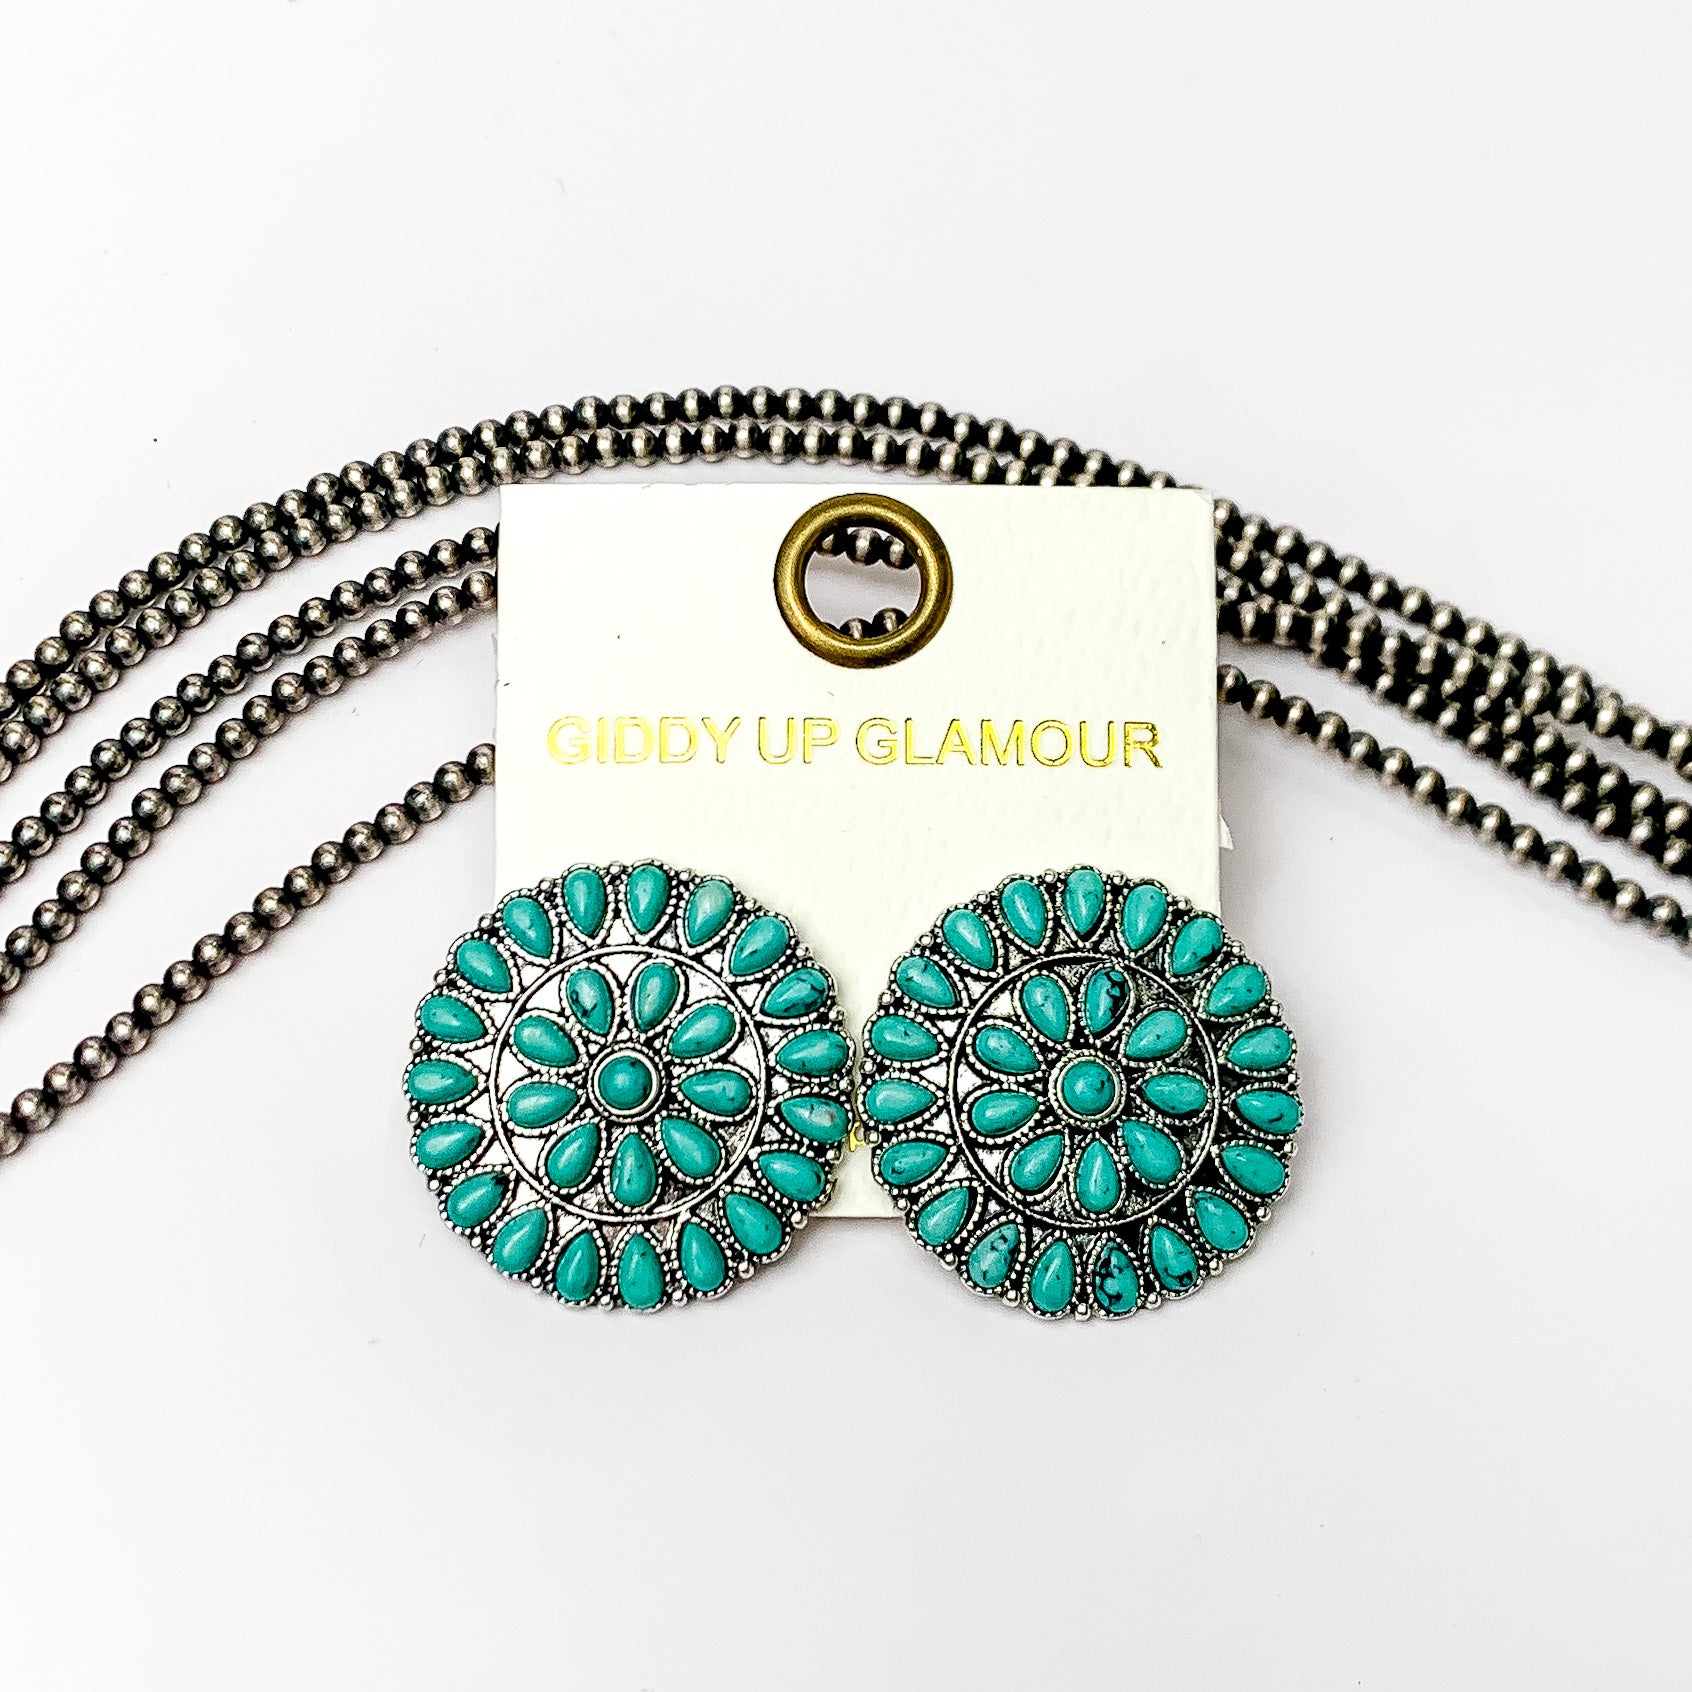 Silver Tone Circle Cluster Stud Earrings with Turquoise Stones. Pictured on a white background with beads behind the earrings. 